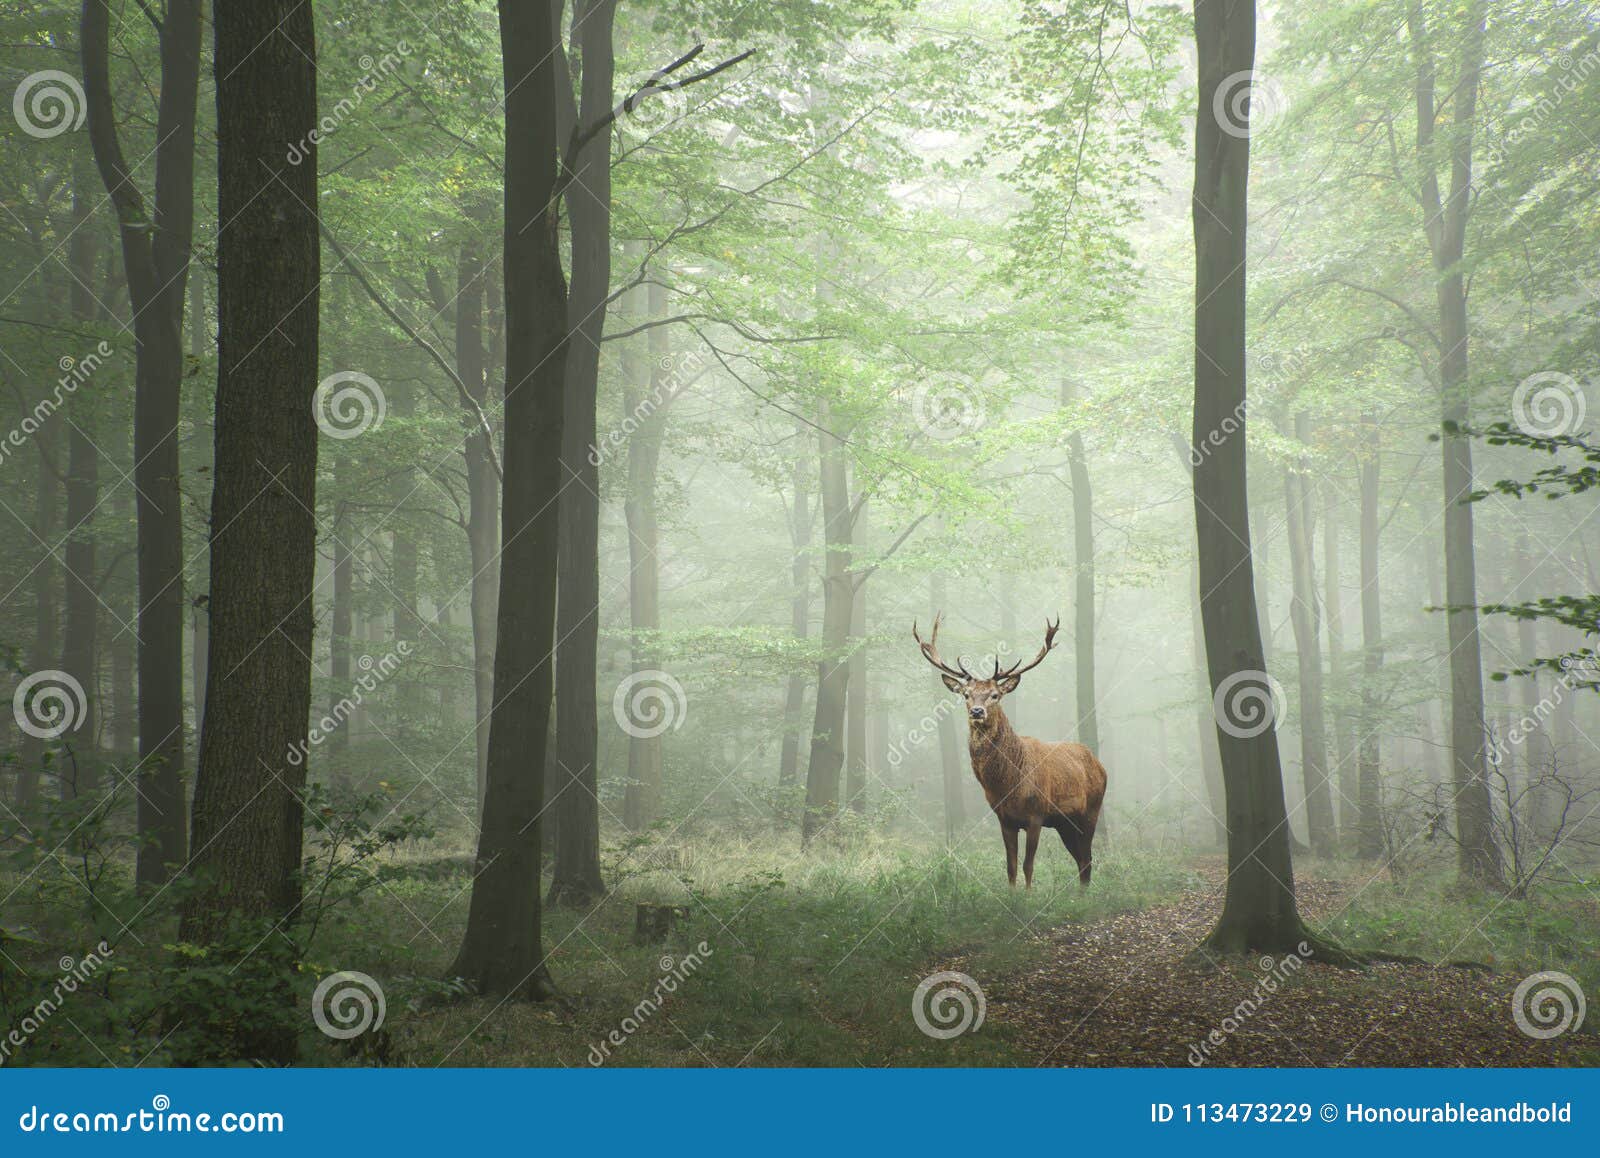 red deer stag in lush green fairytale growth concept foggy fores